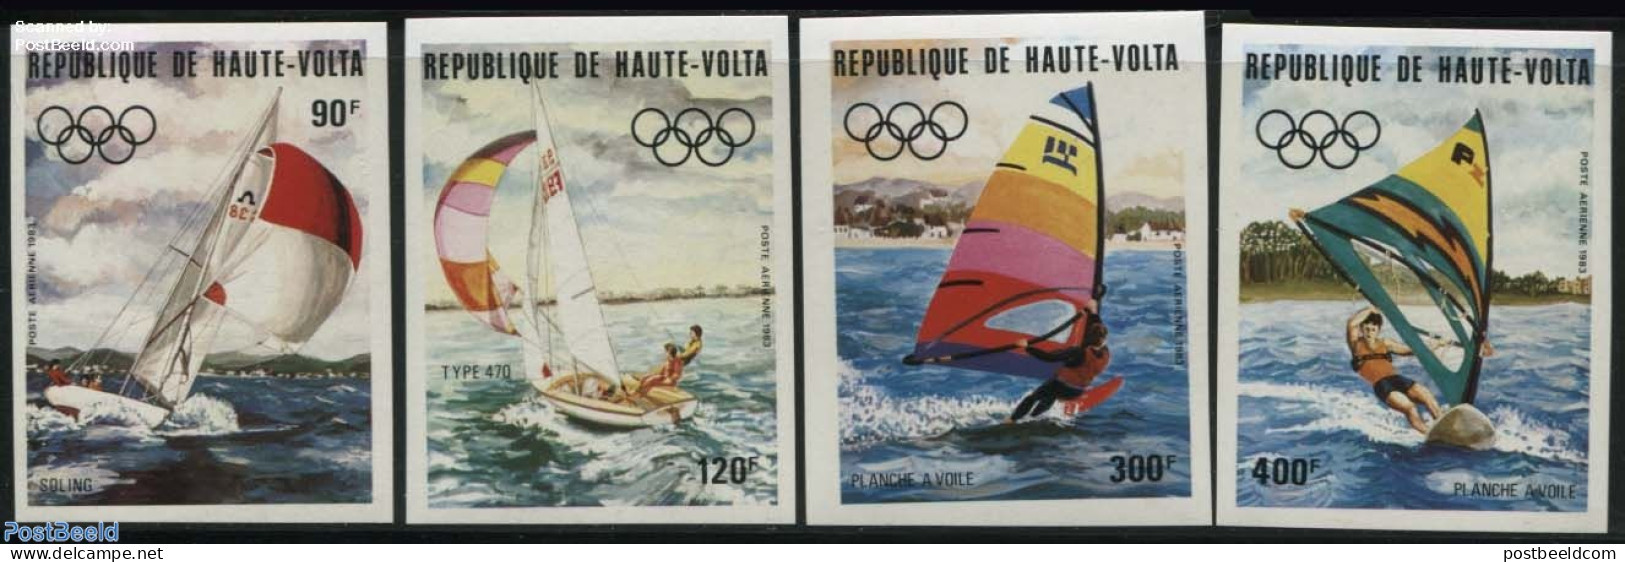 Upper Volta 1983 Olympic Games 4v, Imperforated, Mint NH, Sport - Olympic Games - Sailing - Vela